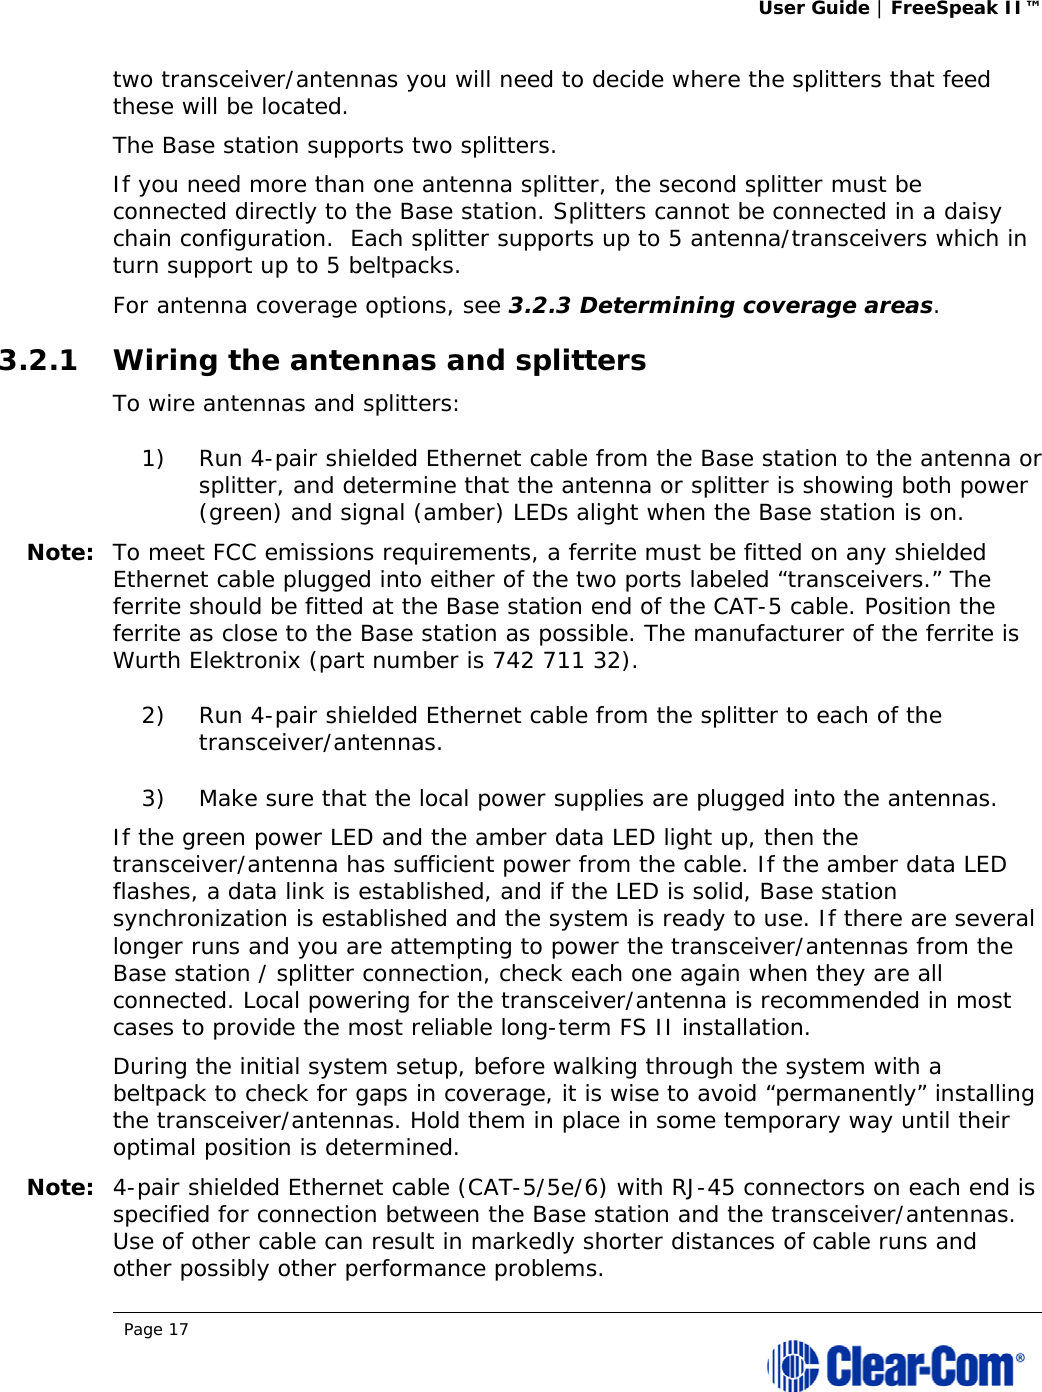 User Guide | FreeSpeak II™  Page 17  two transceiver/antennas you will need to decide where the splitters that feed these will be located.  The Base station supports two splitters. If you need more than one antenna splitter, the second splitter must be connected directly to the Base station. Splitters cannot be connected in a daisy chain configuration.  Each splitter supports up to 5 antenna/transceivers which in turn support up to 5 beltpacks. For antenna coverage options, see 3.2.3 Determining coverage areas.  3.2.1 Wiring the antennas and splitters To wire antennas and splitters: 1) Run 4-pair shielded Ethernet cable from the Base station to the antenna or splitter, and determine that the antenna or splitter is showing both power (green) and signal (amber) LEDs alight when the Base station is on.  Note: To meet FCC emissions requirements, a ferrite must be fitted on any shielded Ethernet cable plugged into either of the two ports labeled “transceivers.” The ferrite should be fitted at the Base station end of the CAT-5 cable. Position the ferrite as close to the Base station as possible. The manufacturer of the ferrite is Wurth Elektronix (part number is 742 711 32). 2) Run 4-pair shielded Ethernet cable from the splitter to each of the transceiver/antennas.  3) Make sure that the local power supplies are plugged into the antennas.  If the green power LED and the amber data LED light up, then the transceiver/antenna has sufficient power from the cable. If the amber data LED flashes, a data link is established, and if the LED is solid, Base station synchronization is established and the system is ready to use. If there are several longer runs and you are attempting to power the transceiver/antennas from the Base station / splitter connection, check each one again when they are all connected. Local powering for the transceiver/antenna is recommended in most cases to provide the most reliable long-term FS II installation. During the initial system setup, before walking through the system with a beltpack to check for gaps in coverage, it is wise to avoid “permanently” installing the transceiver/antennas. Hold them in place in some temporary way until their optimal position is determined. Note: 4-pair shielded Ethernet cable (CAT-5/5e/6) with RJ-45 connectors on each end is specified for connection between the Base station and the transceiver/antennas. Use of other cable can result in markedly shorter distances of cable runs and other possibly other performance problems. 